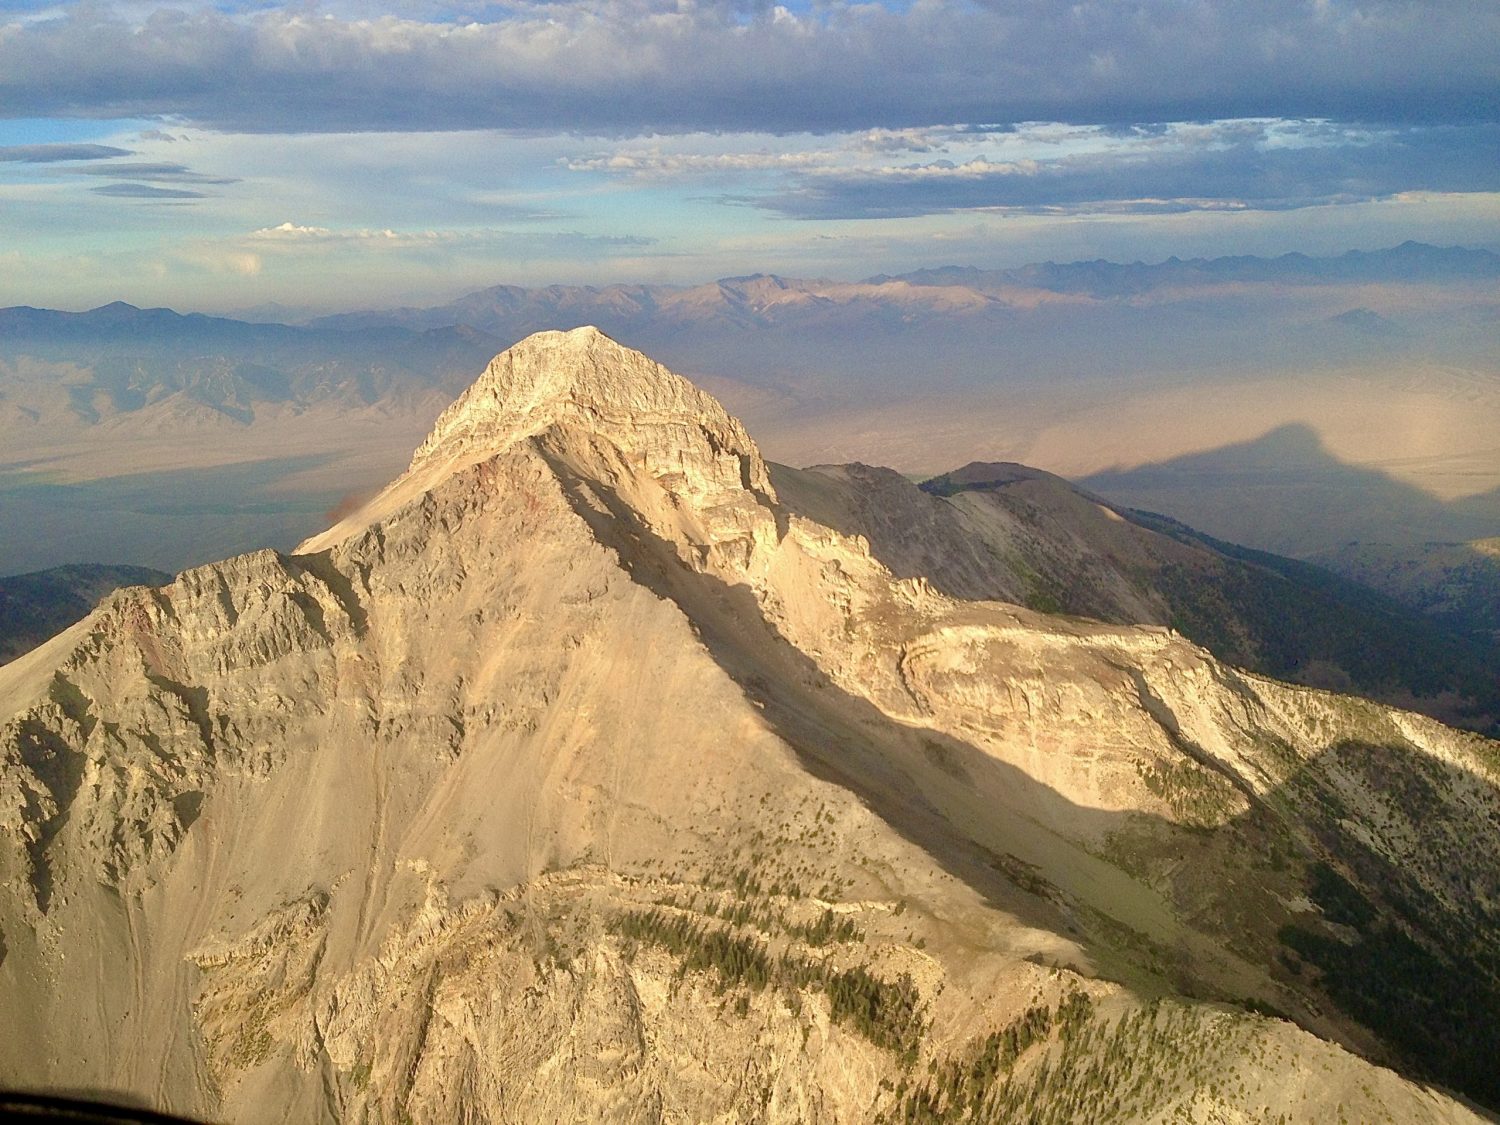 An arial view of spectacular Bell Mountain. Mike Hart Photo